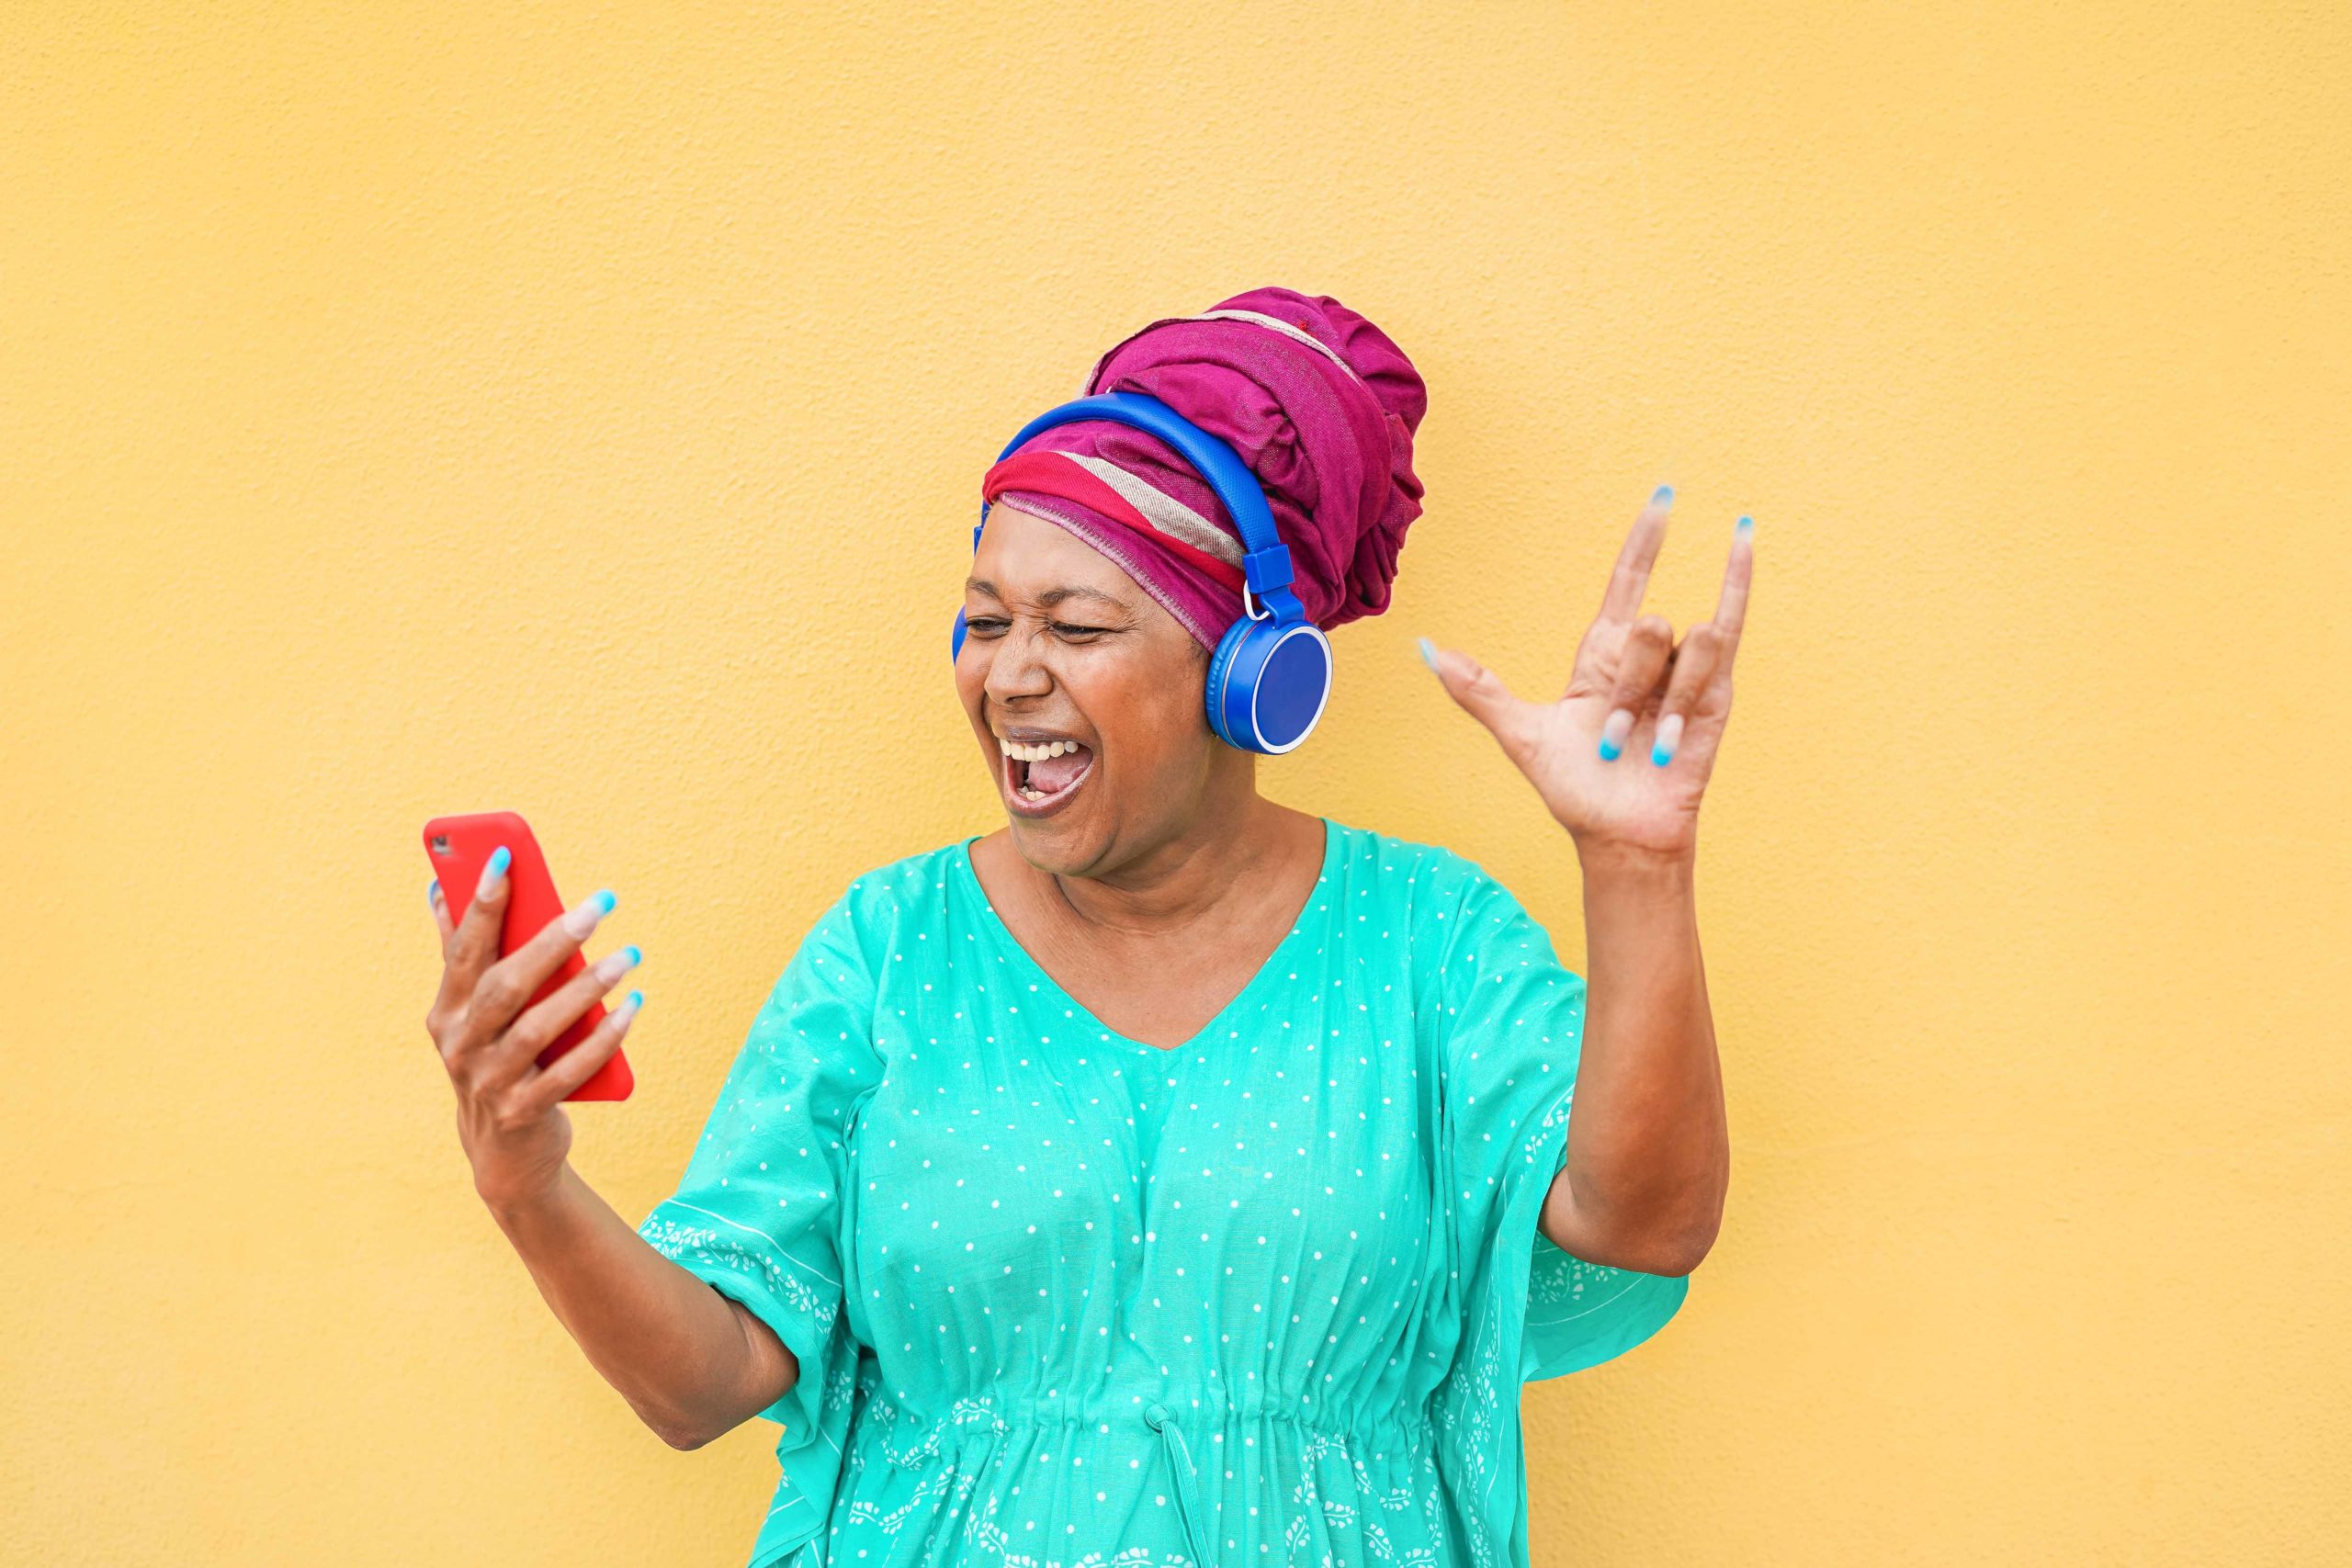 Mature african woman using smartphone app for creating playlist with rock music - Senior female having fun with mobile phone technology - Tech and joyful elderly lifestyle concept - Focus on face